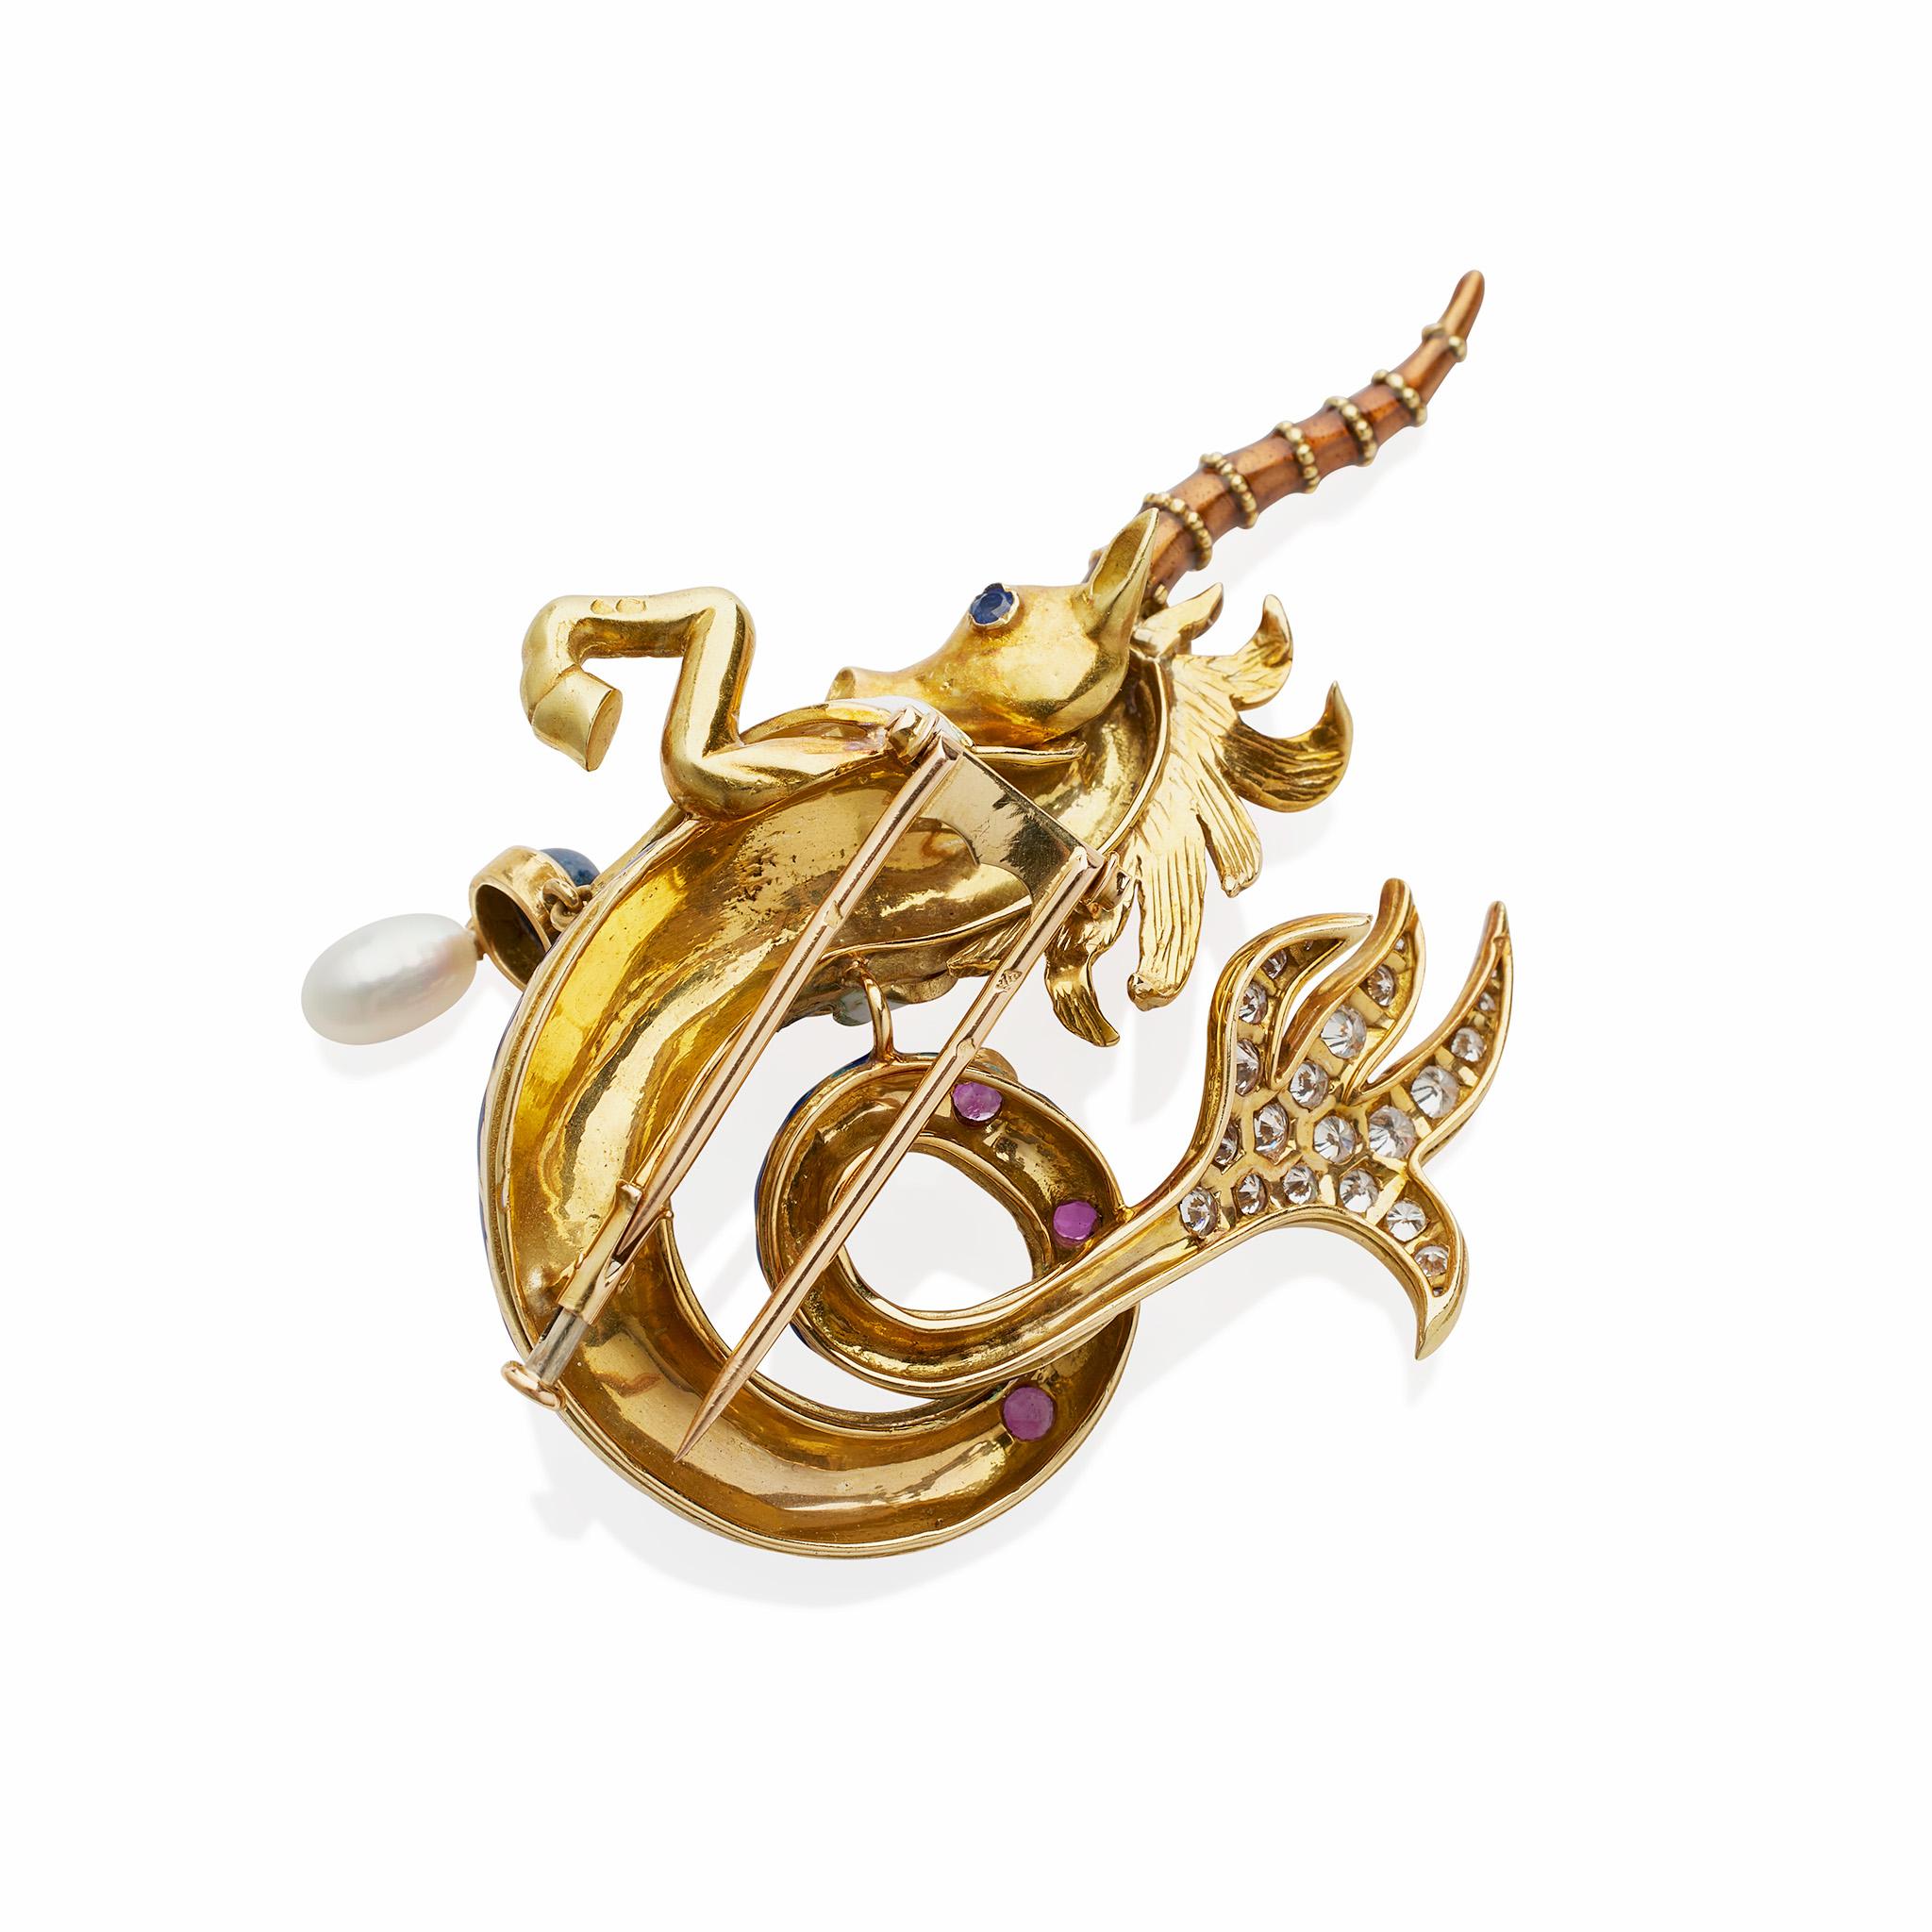   French 1960s Enamel and Gem-set Sea Unicorn Brooch, Jean Thierry Bondt In Excellent Condition For Sale In New York, NY